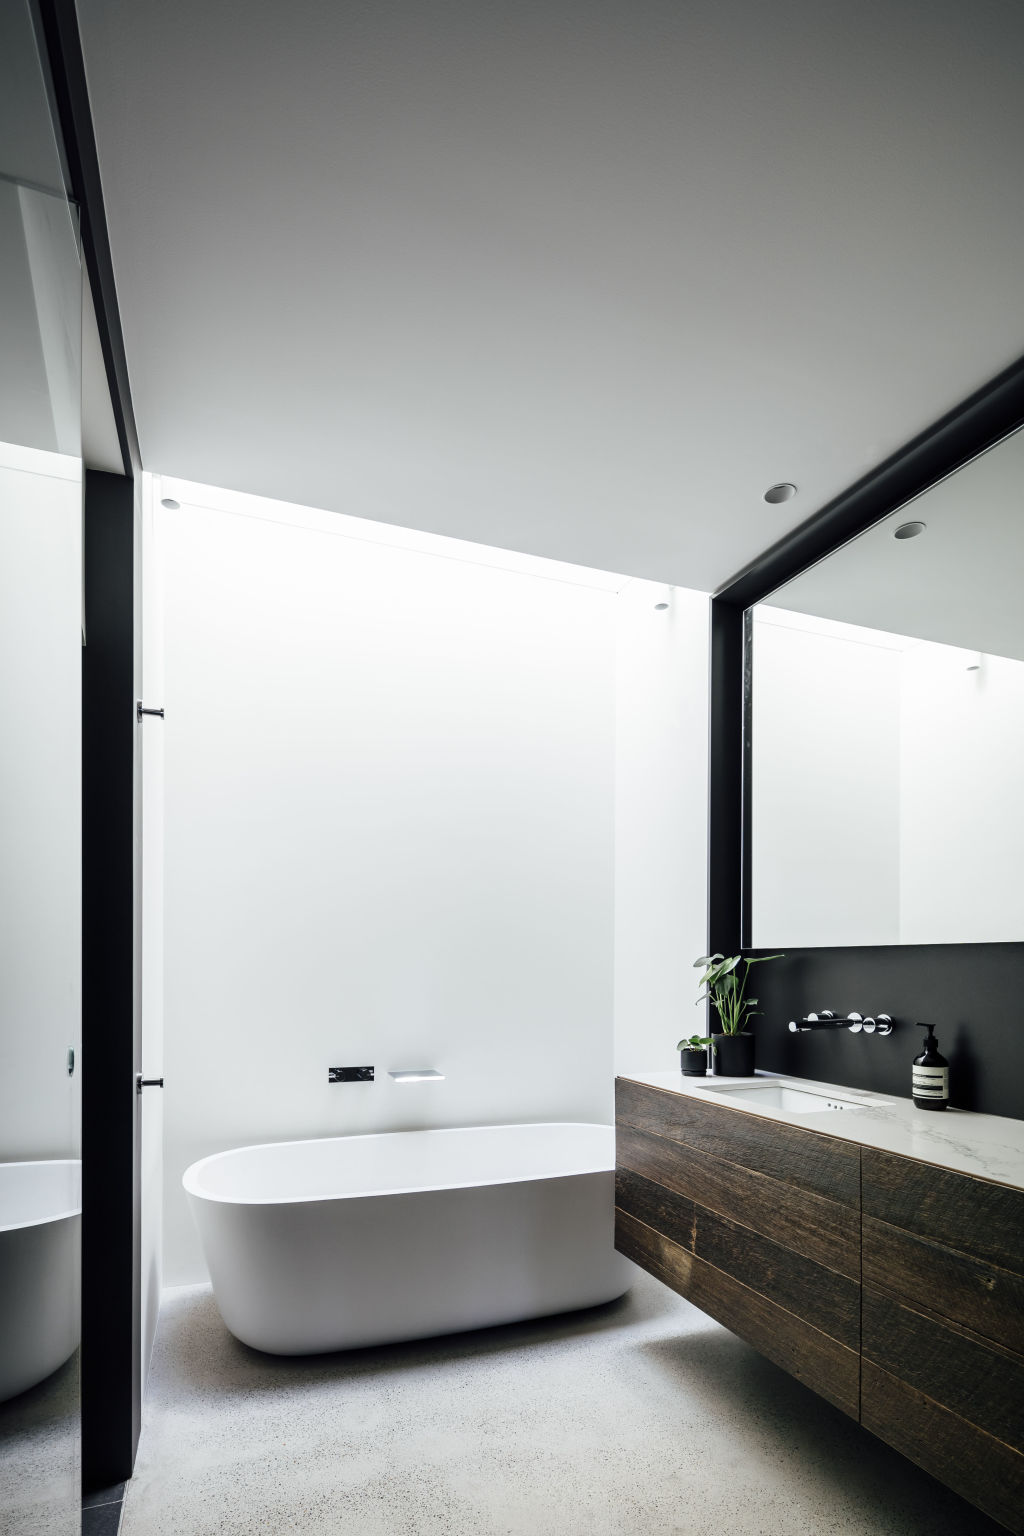 The central skylight above a very small main bathroom makes it breathe and makes it bright. Photo: Michael Kai